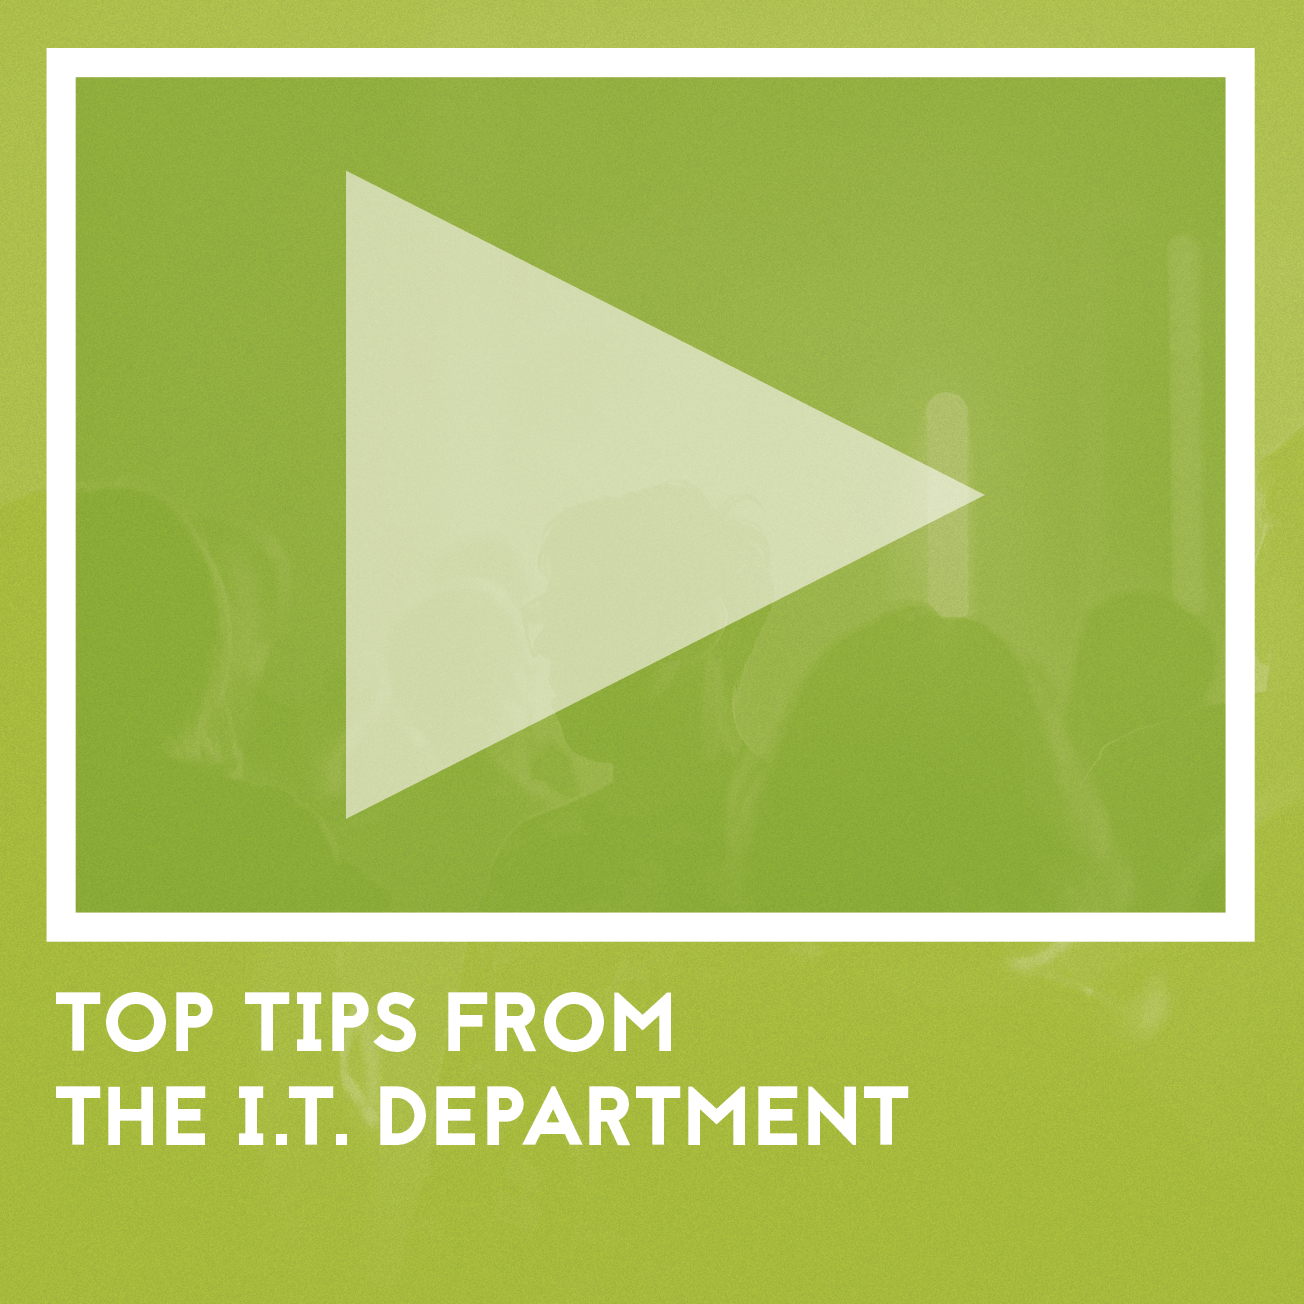 Top tips from IT department